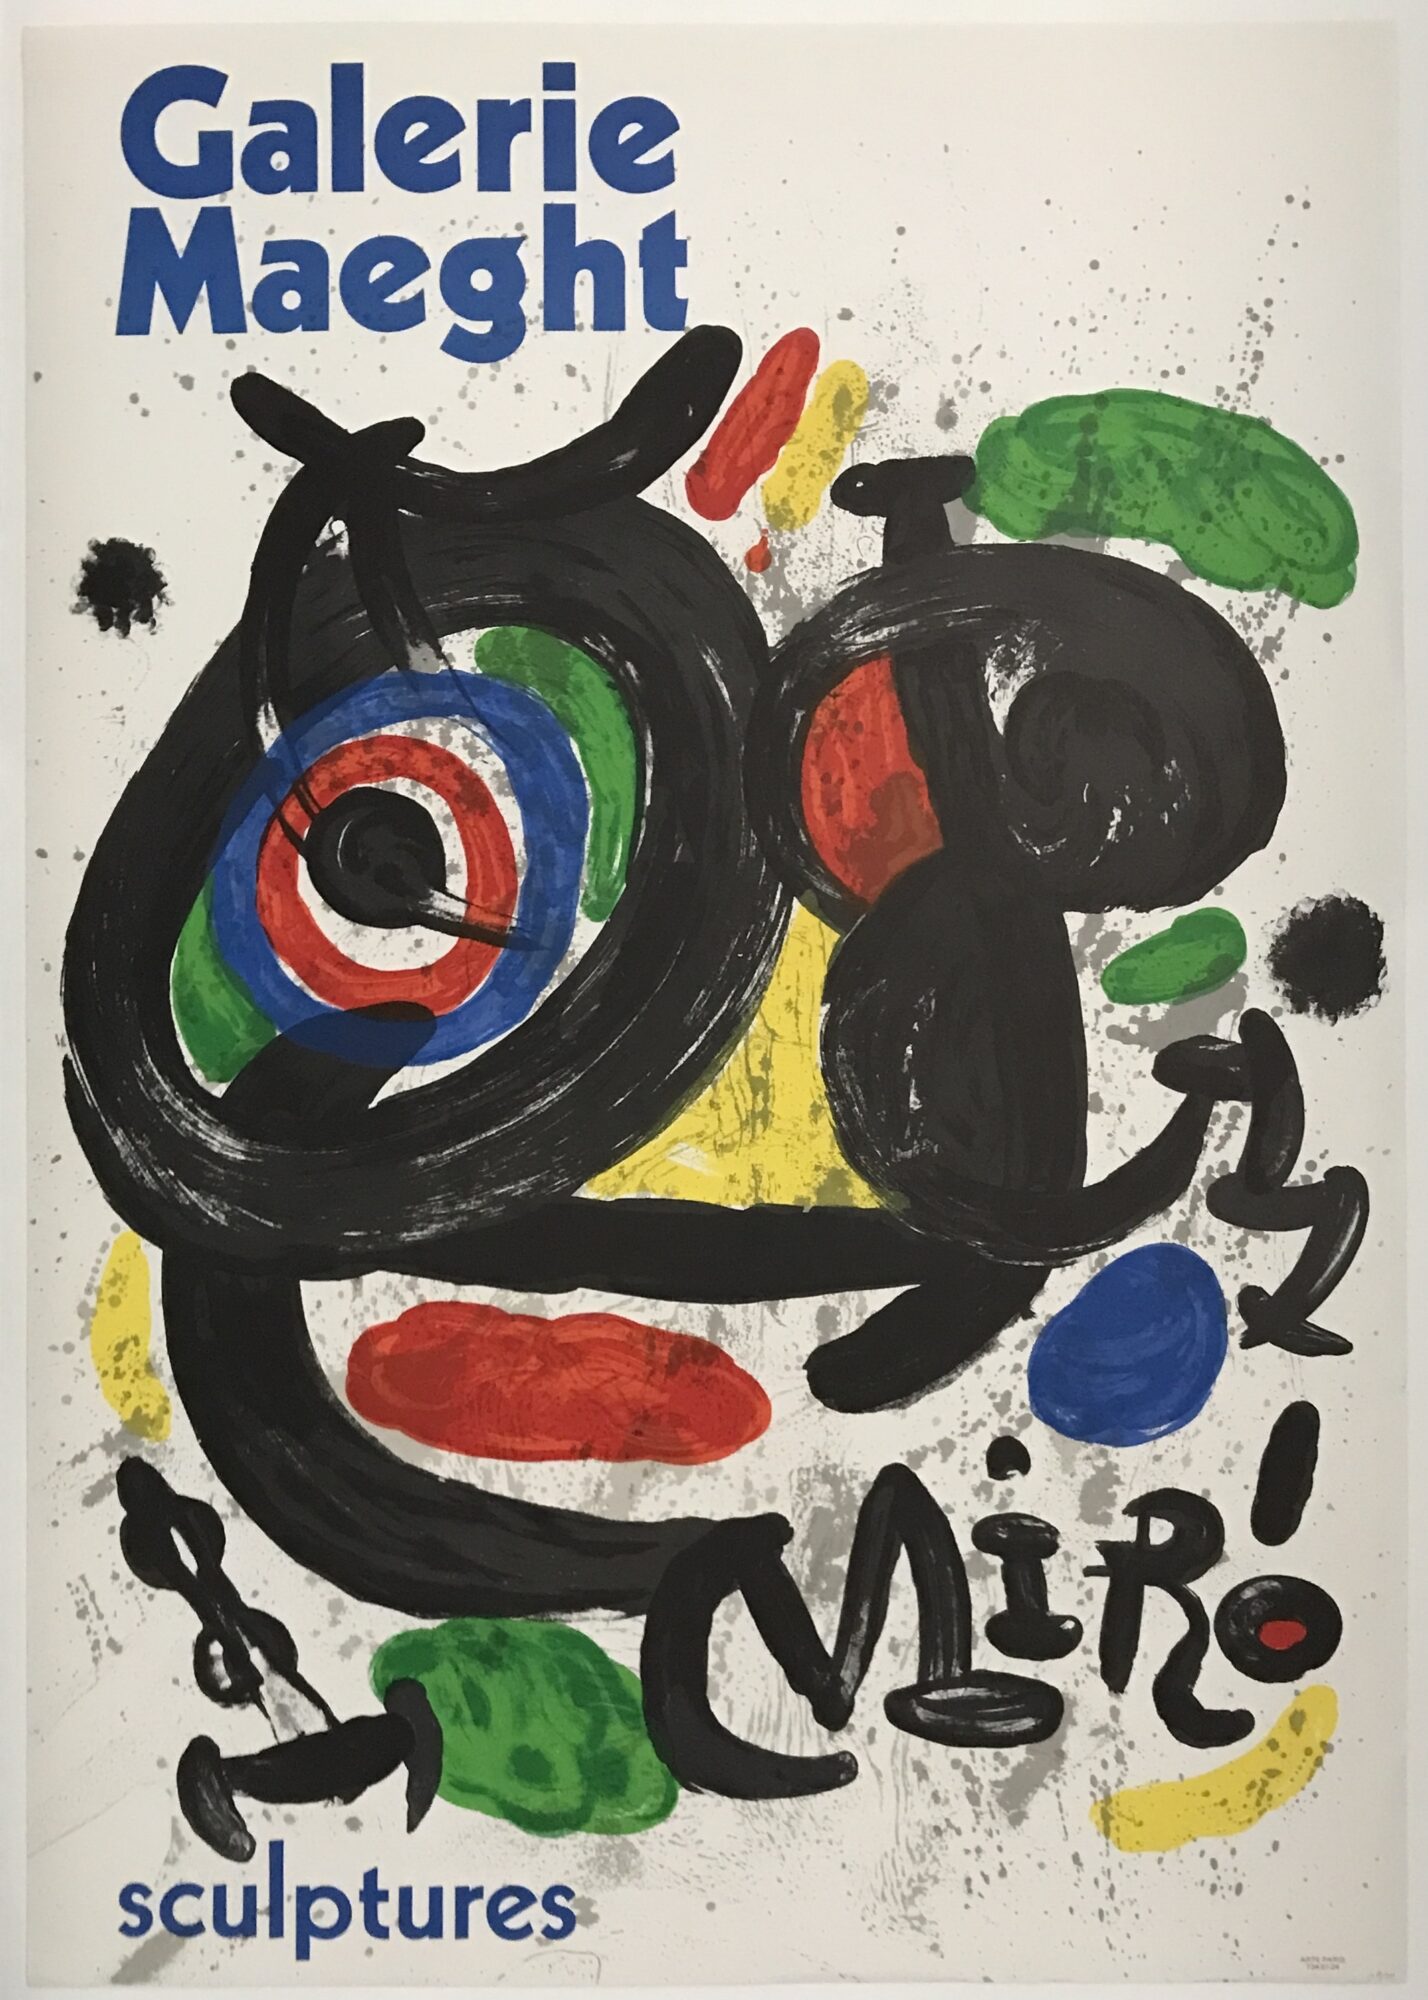 Miró, Sculptures Galerie Maeght, Lithograph Poster